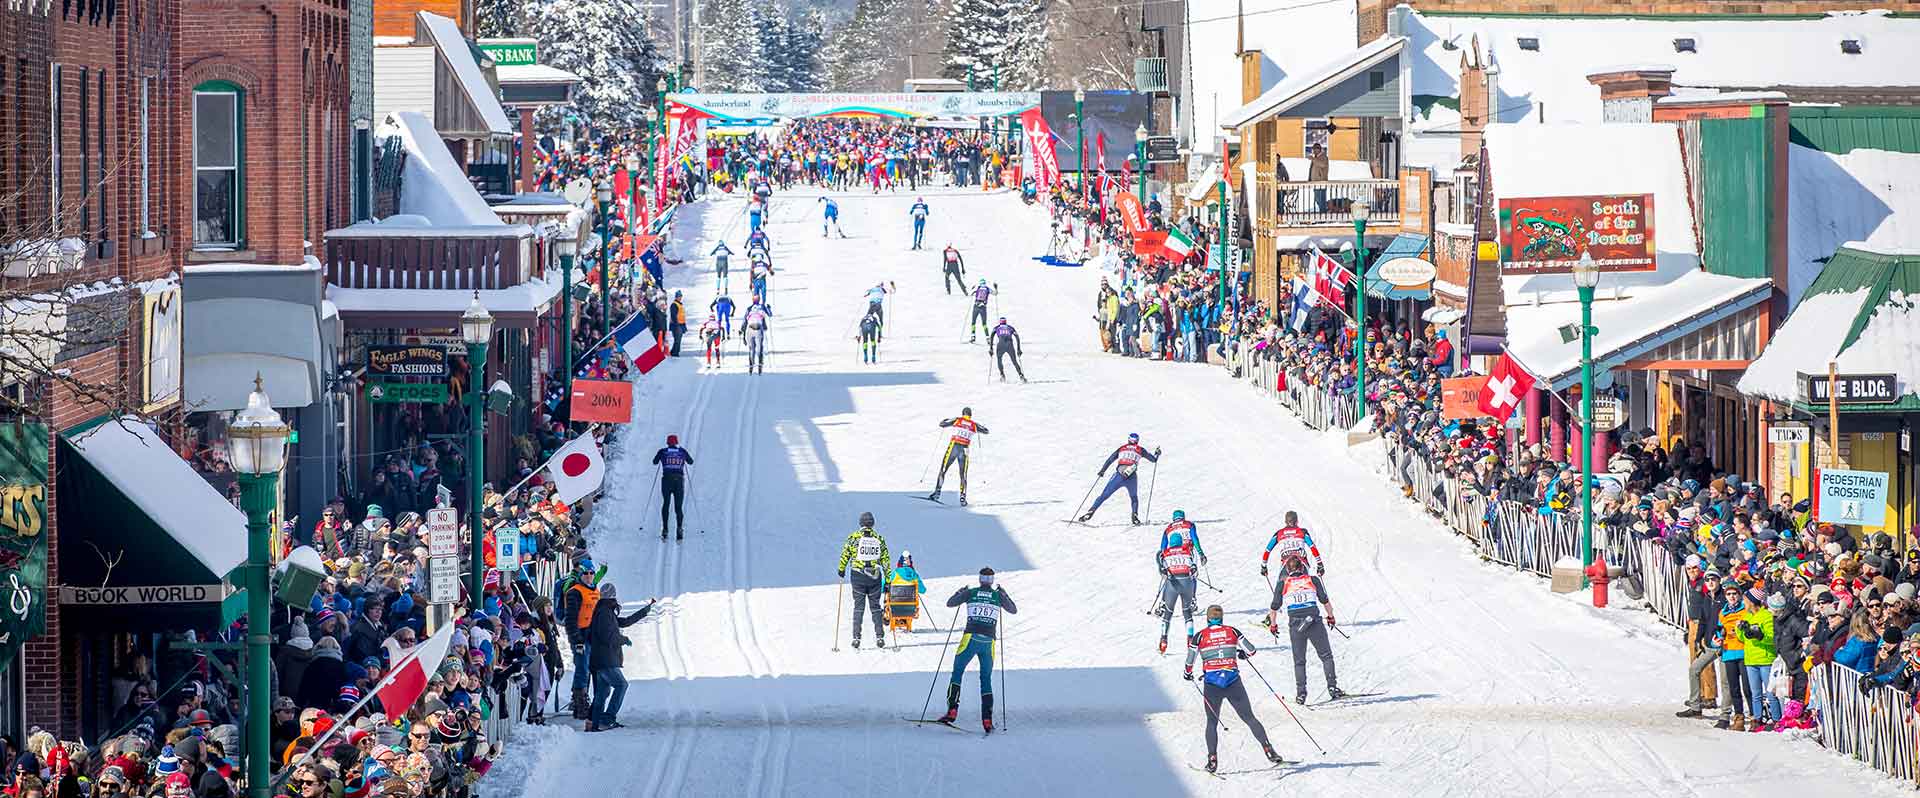 Skiers racing down a crowded, snow-covered city street towards the finish line of the American Birkiebeiner.